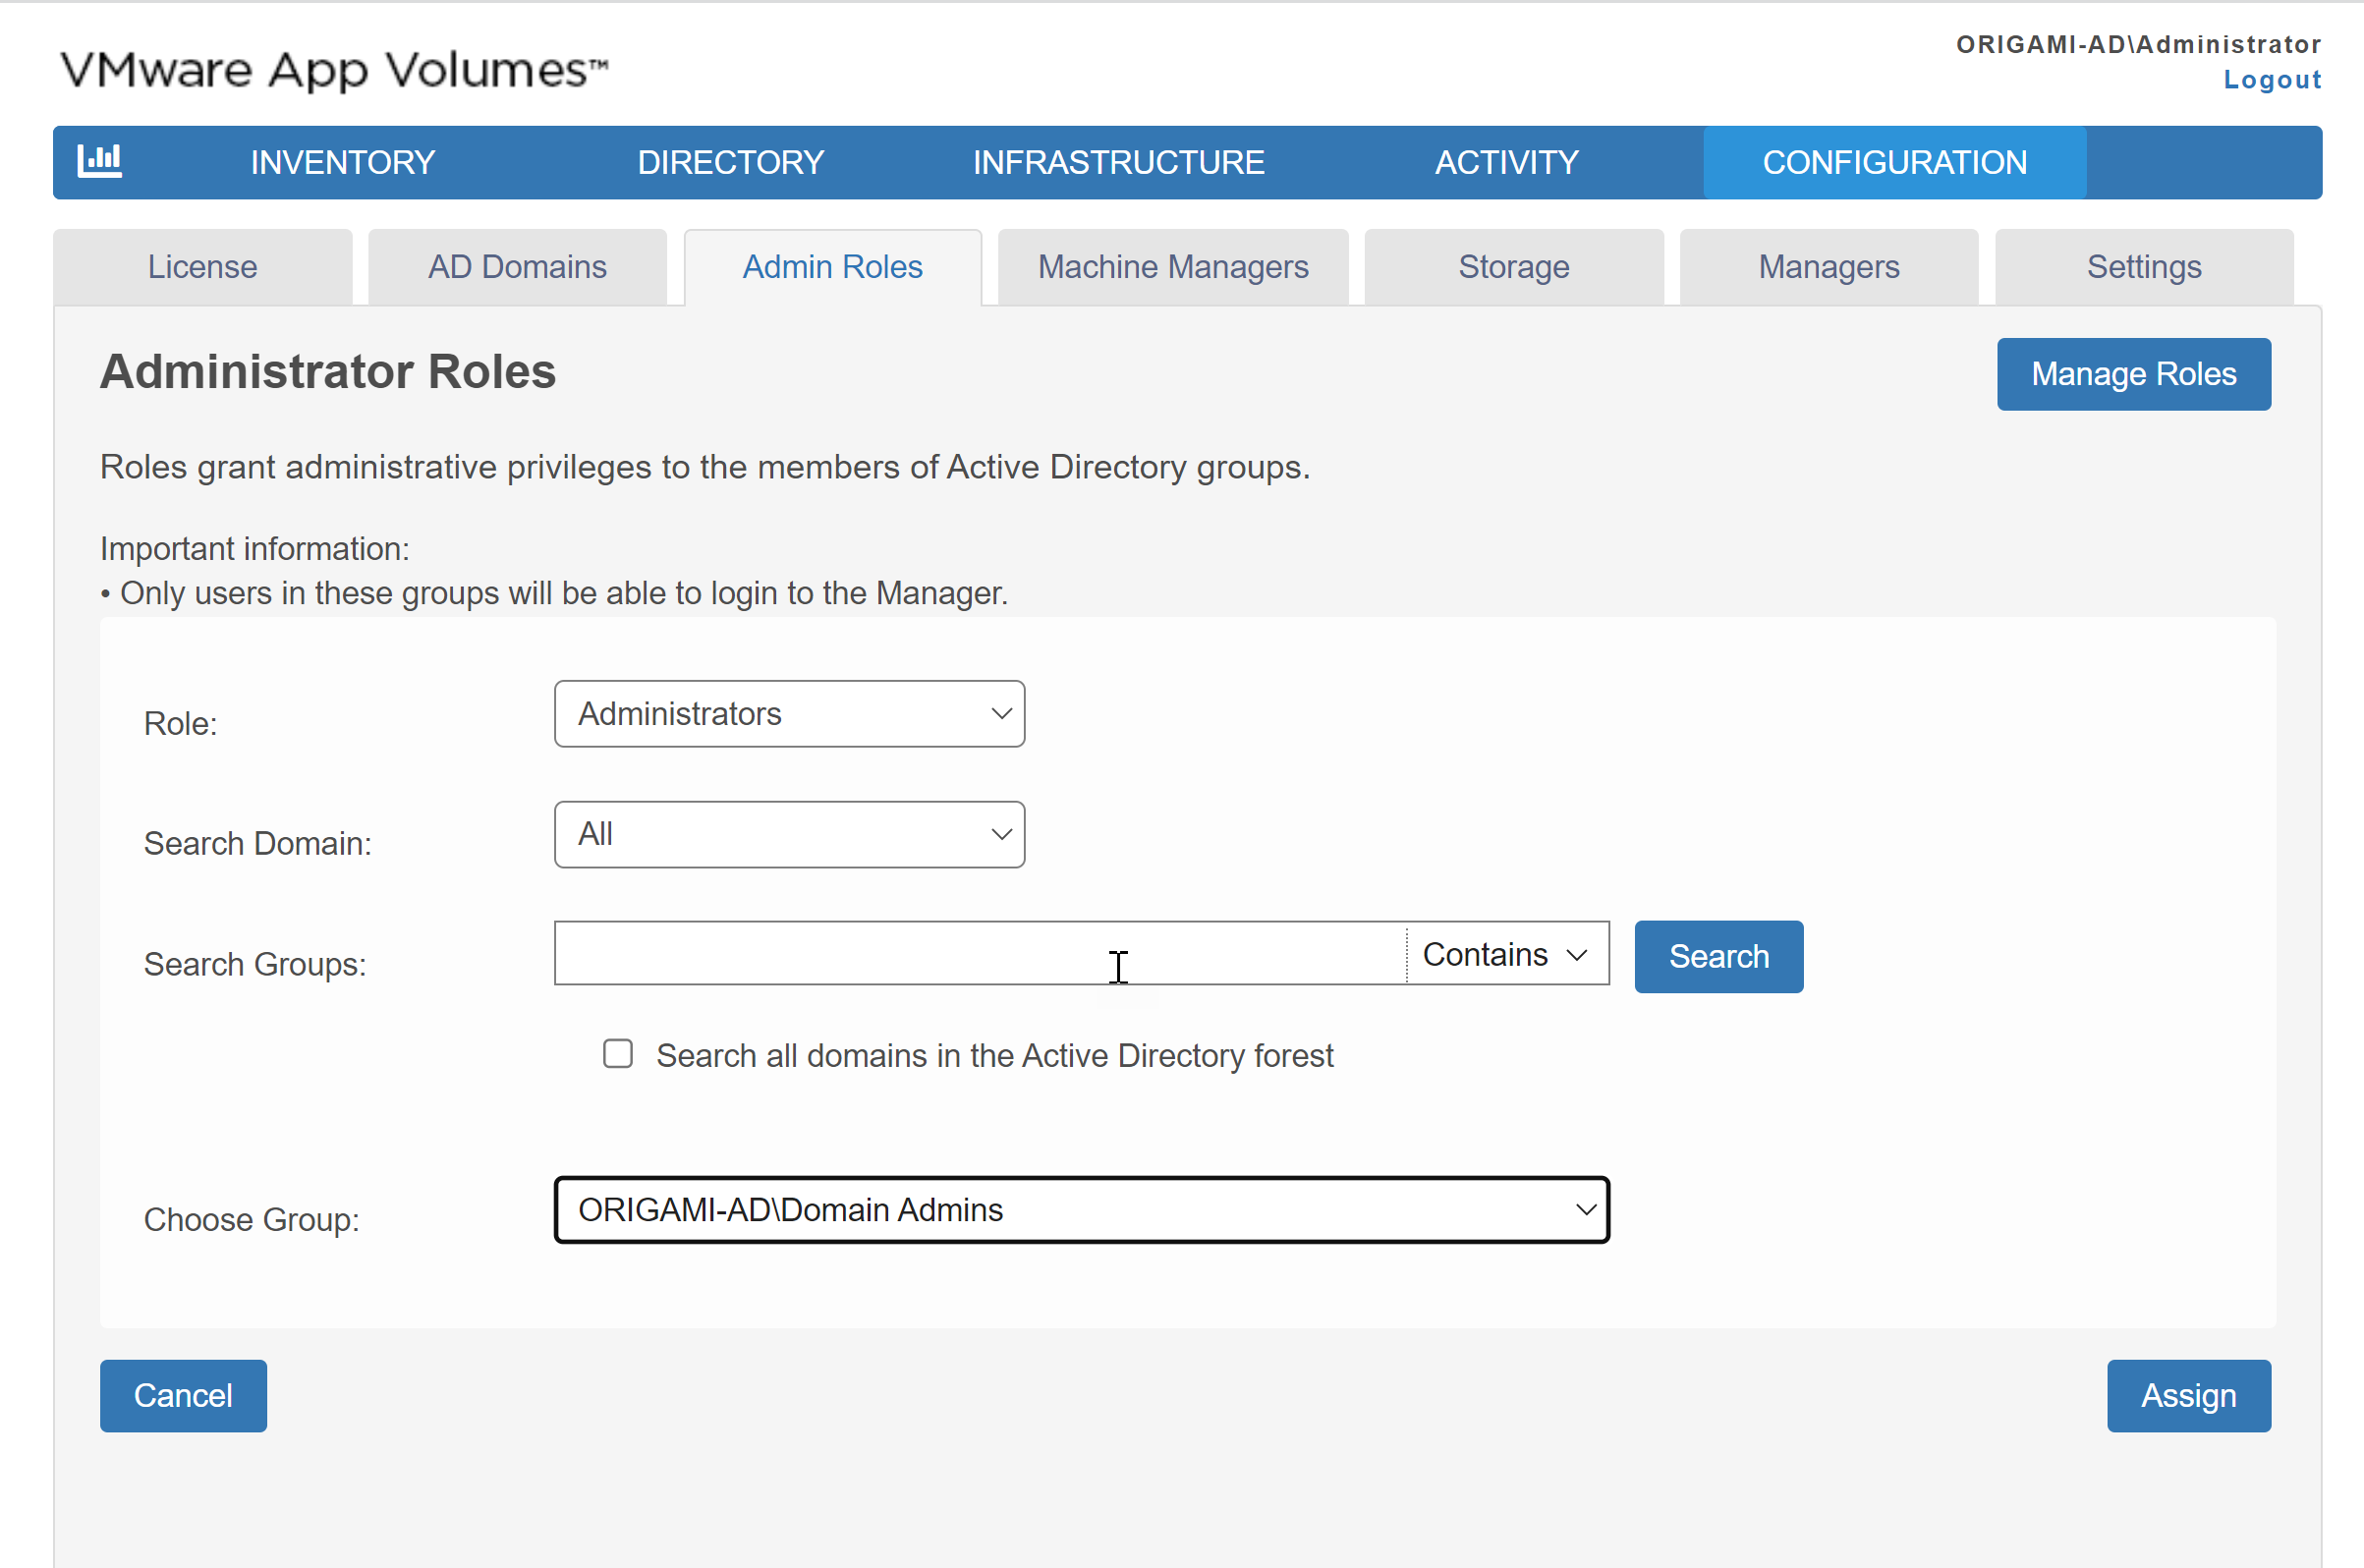 Use the Administrator Roles page to select a built-in role from the Role drop-down box for an active directory group.